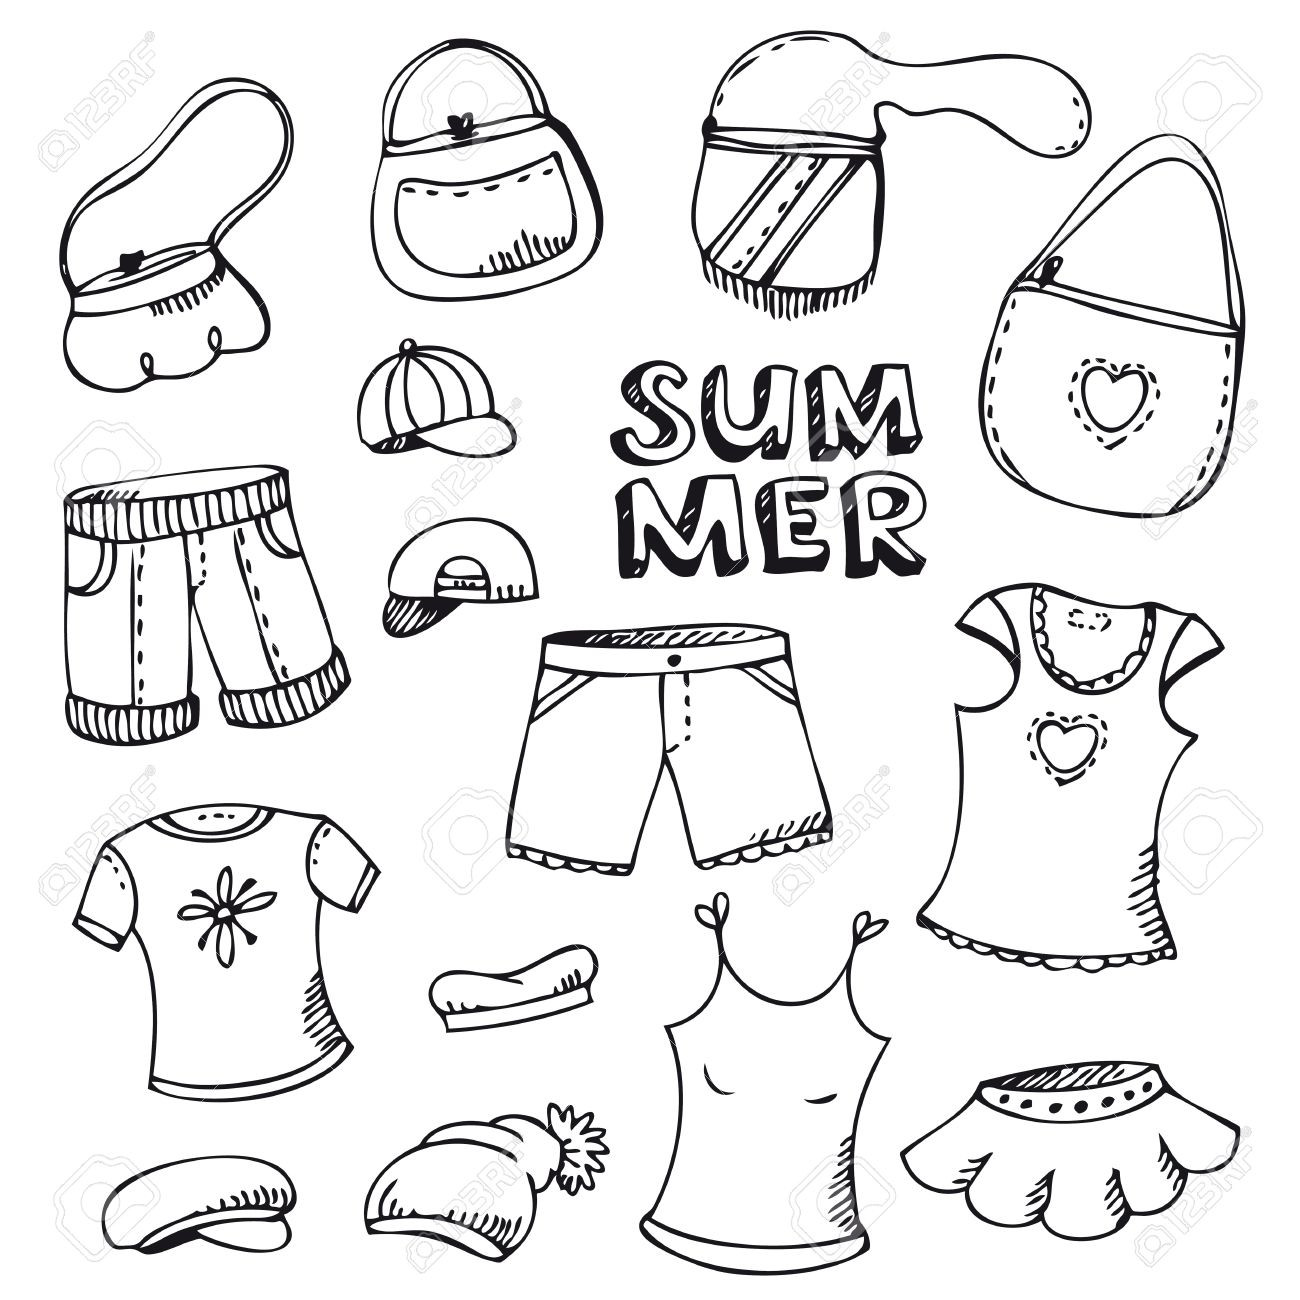 Free Coloring Sheets Of Kids Dressed In Career Clothing
 White Dress clipart summer clothes Pencil and in color